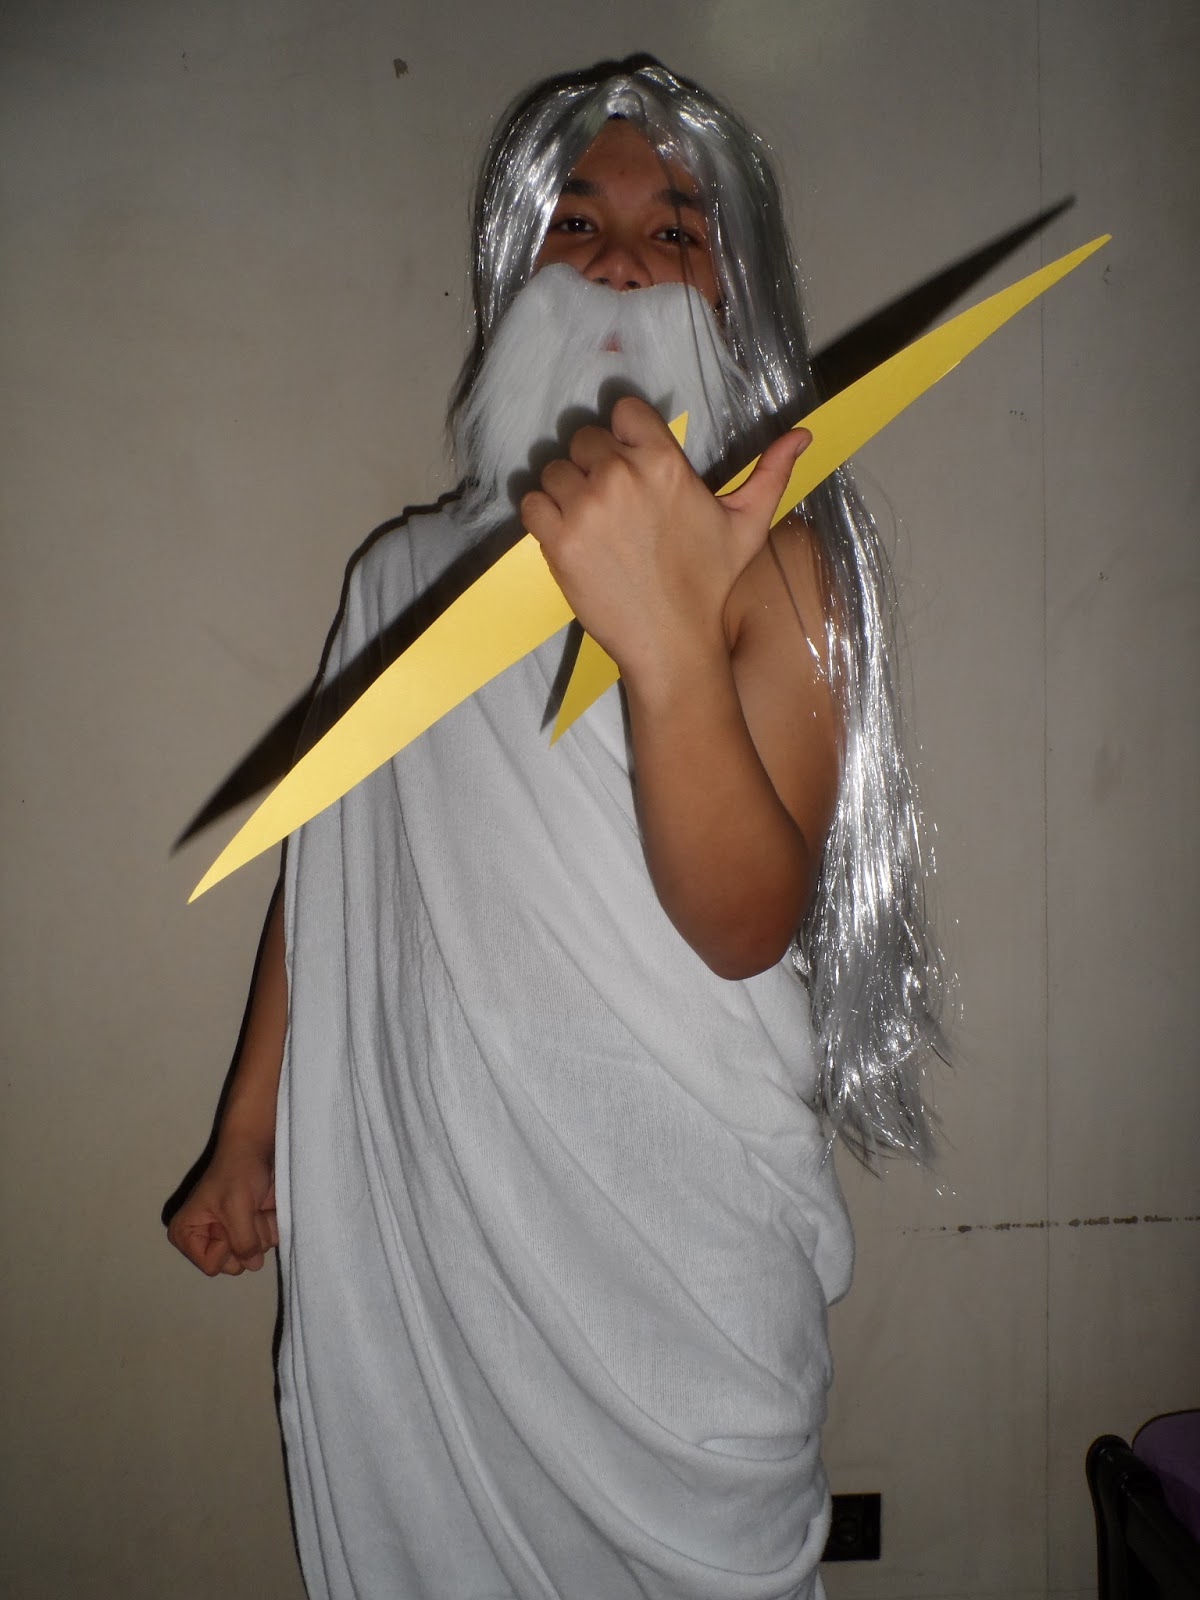 Wazzup Pilipinas News and Events: Zeus : God of Thunder and Lightning